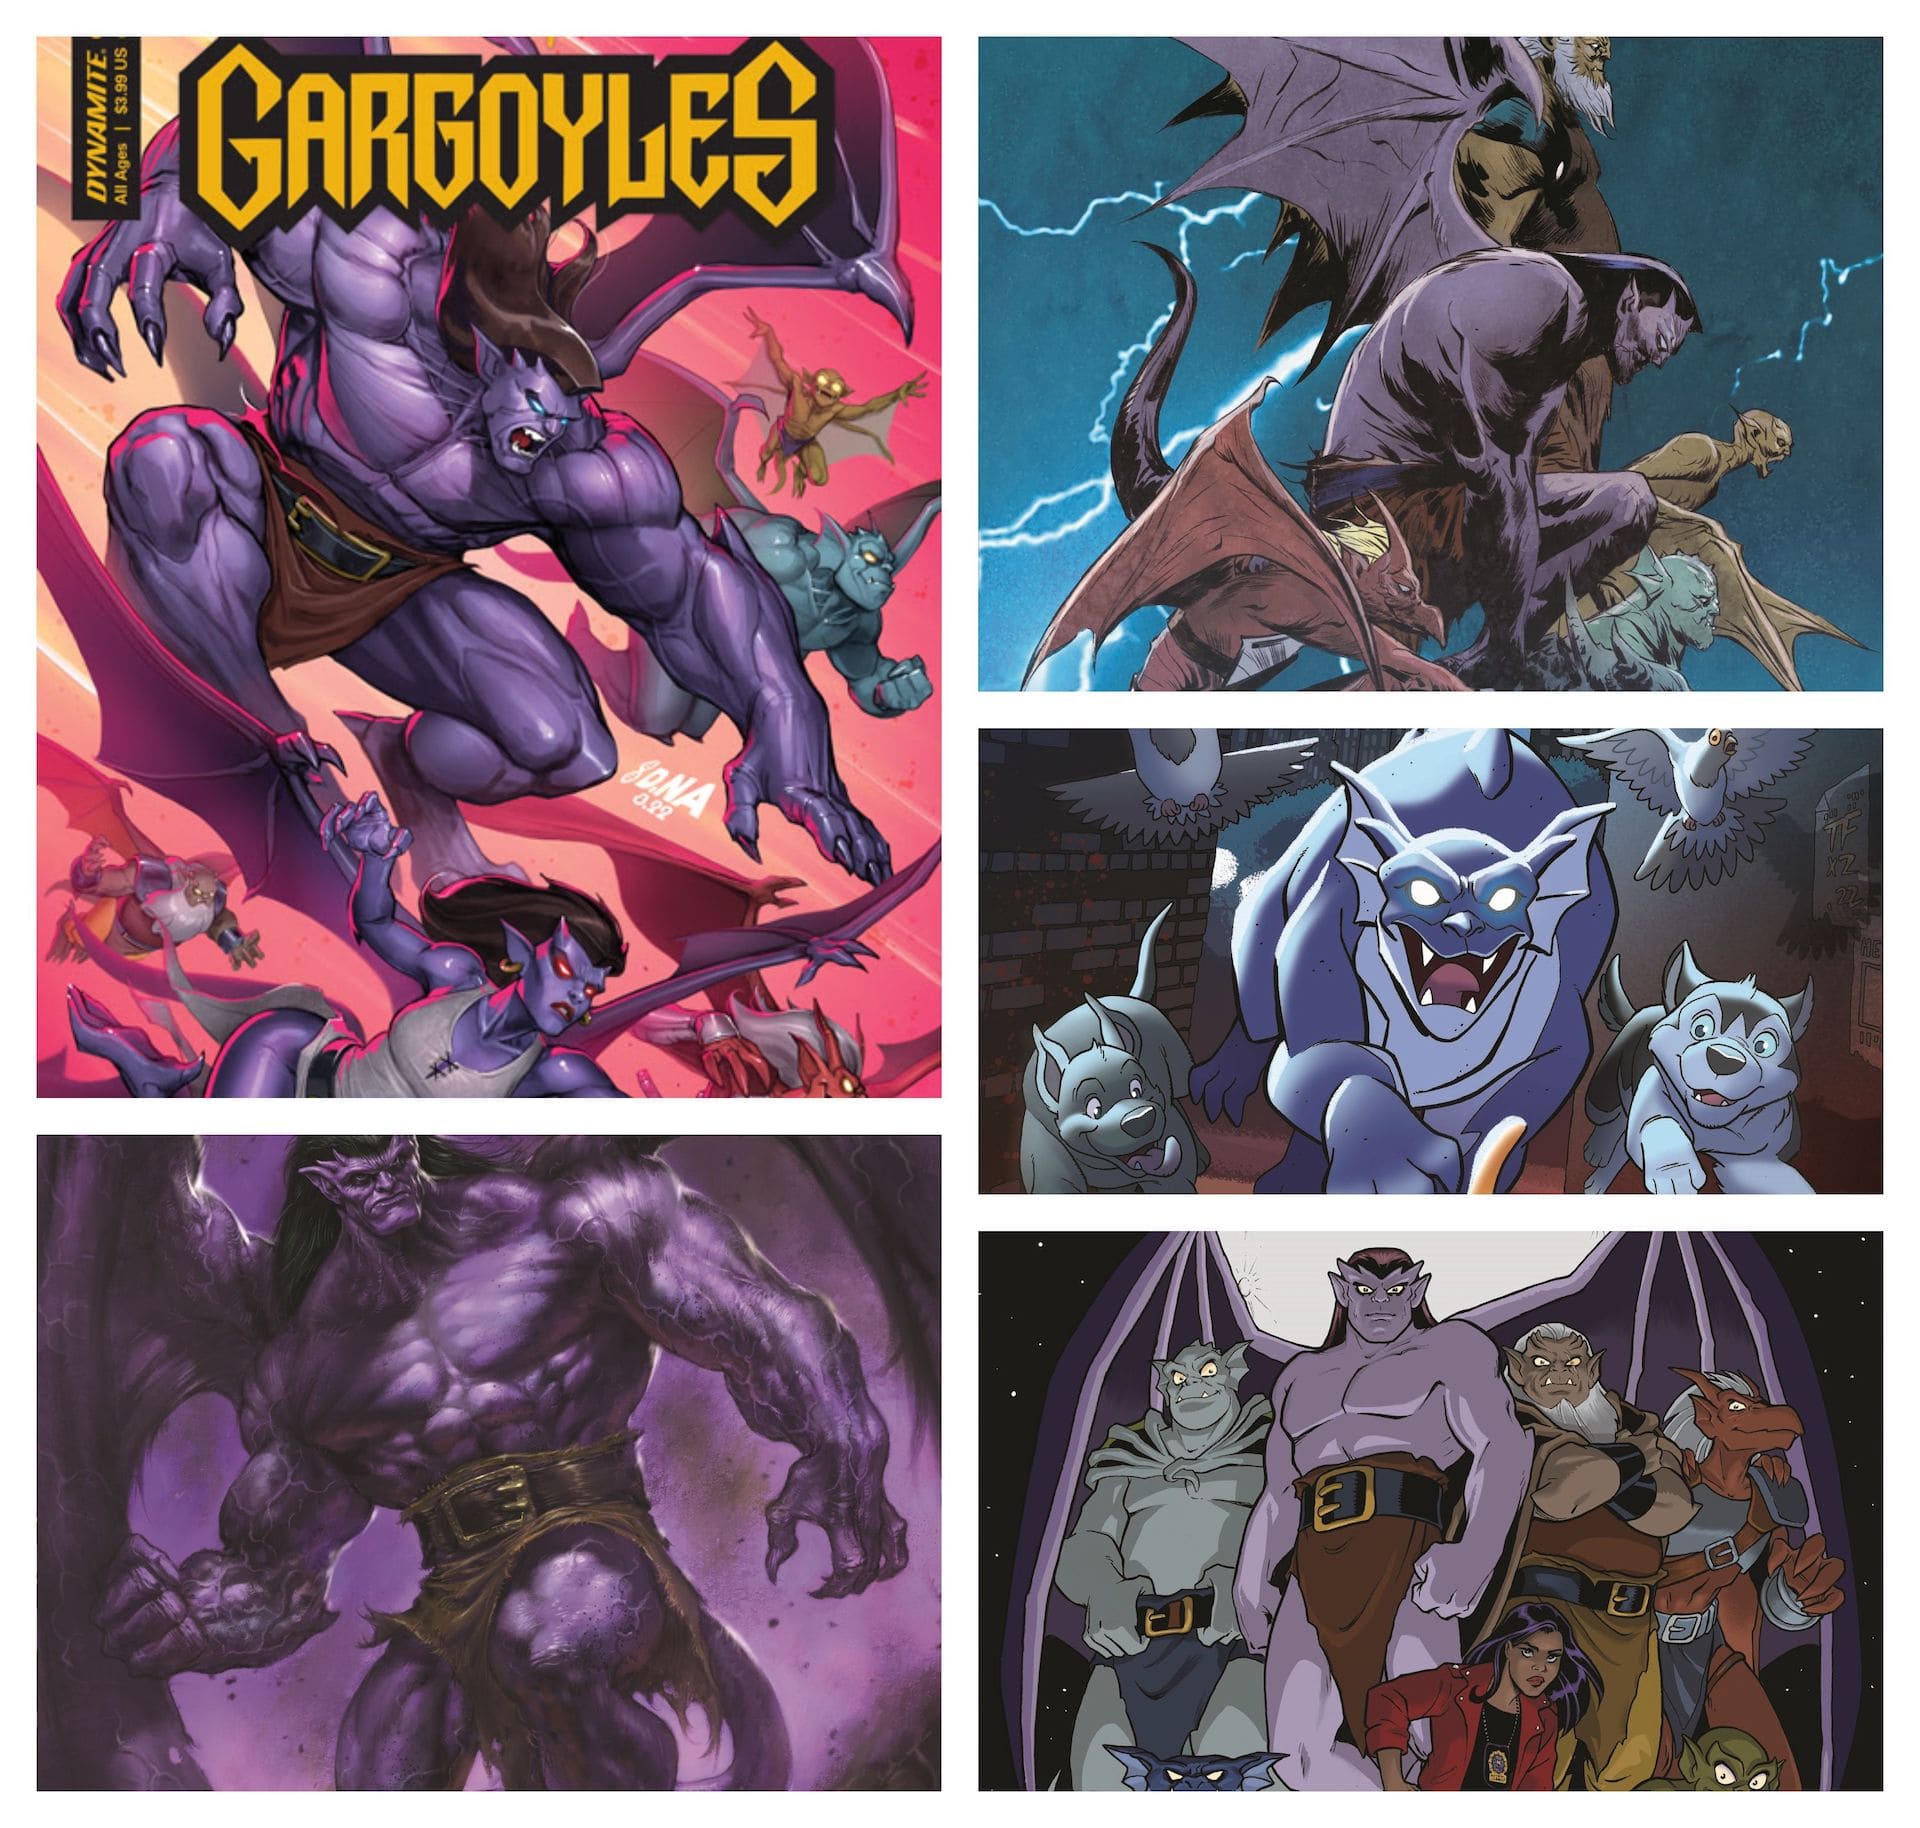 Feast your eyes on six 'Gargoyles' #1 covers set for December release